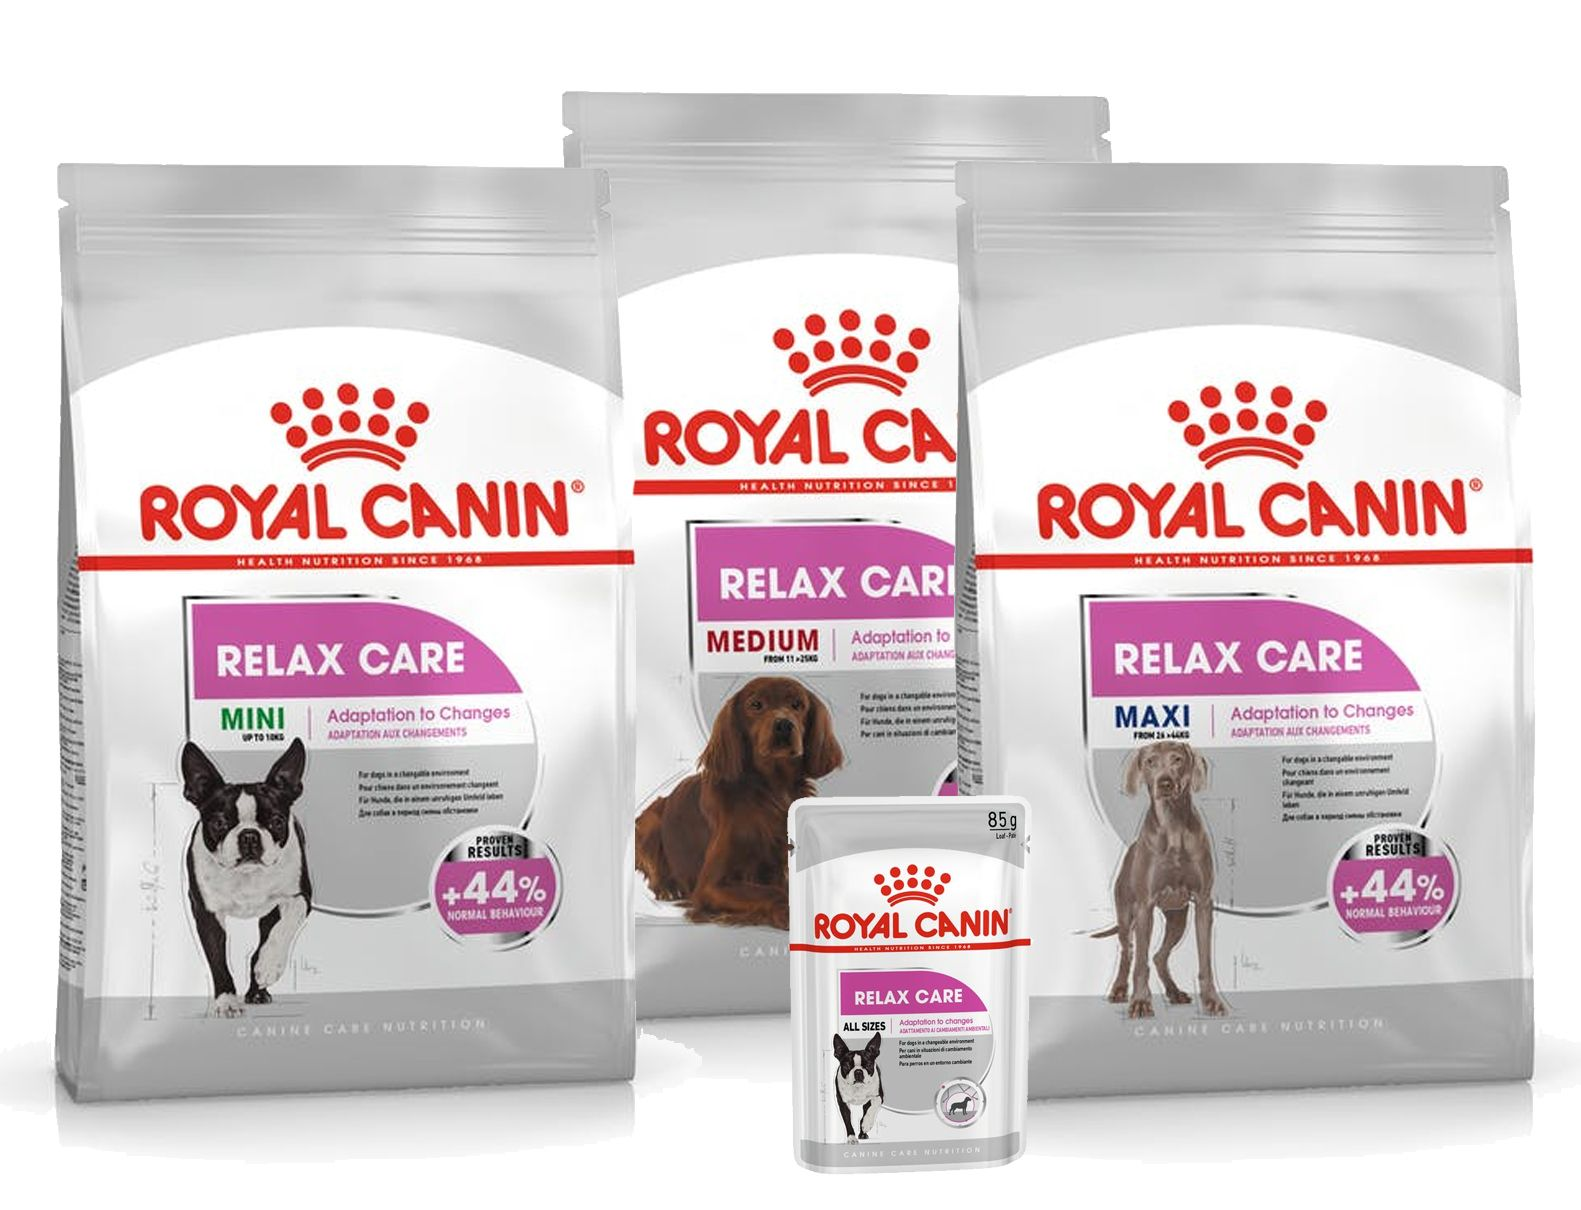 Relax Care for Mini, Medium and Maxi dogs